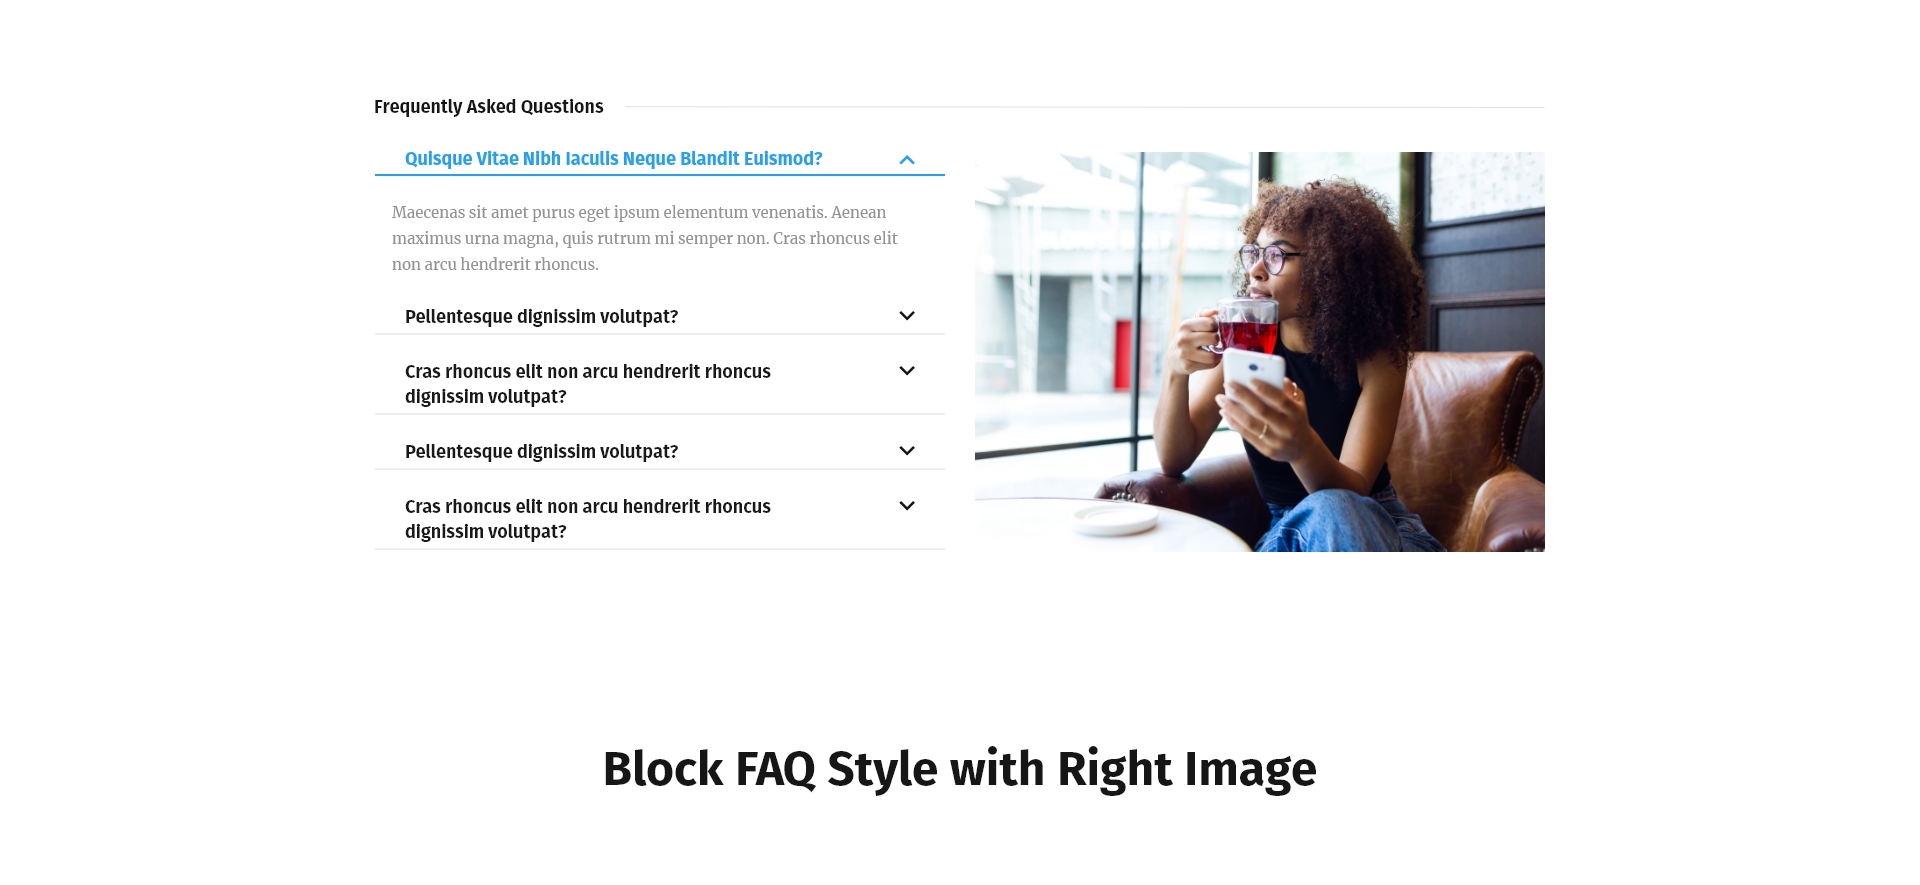 Block FAQ Style with Right Image